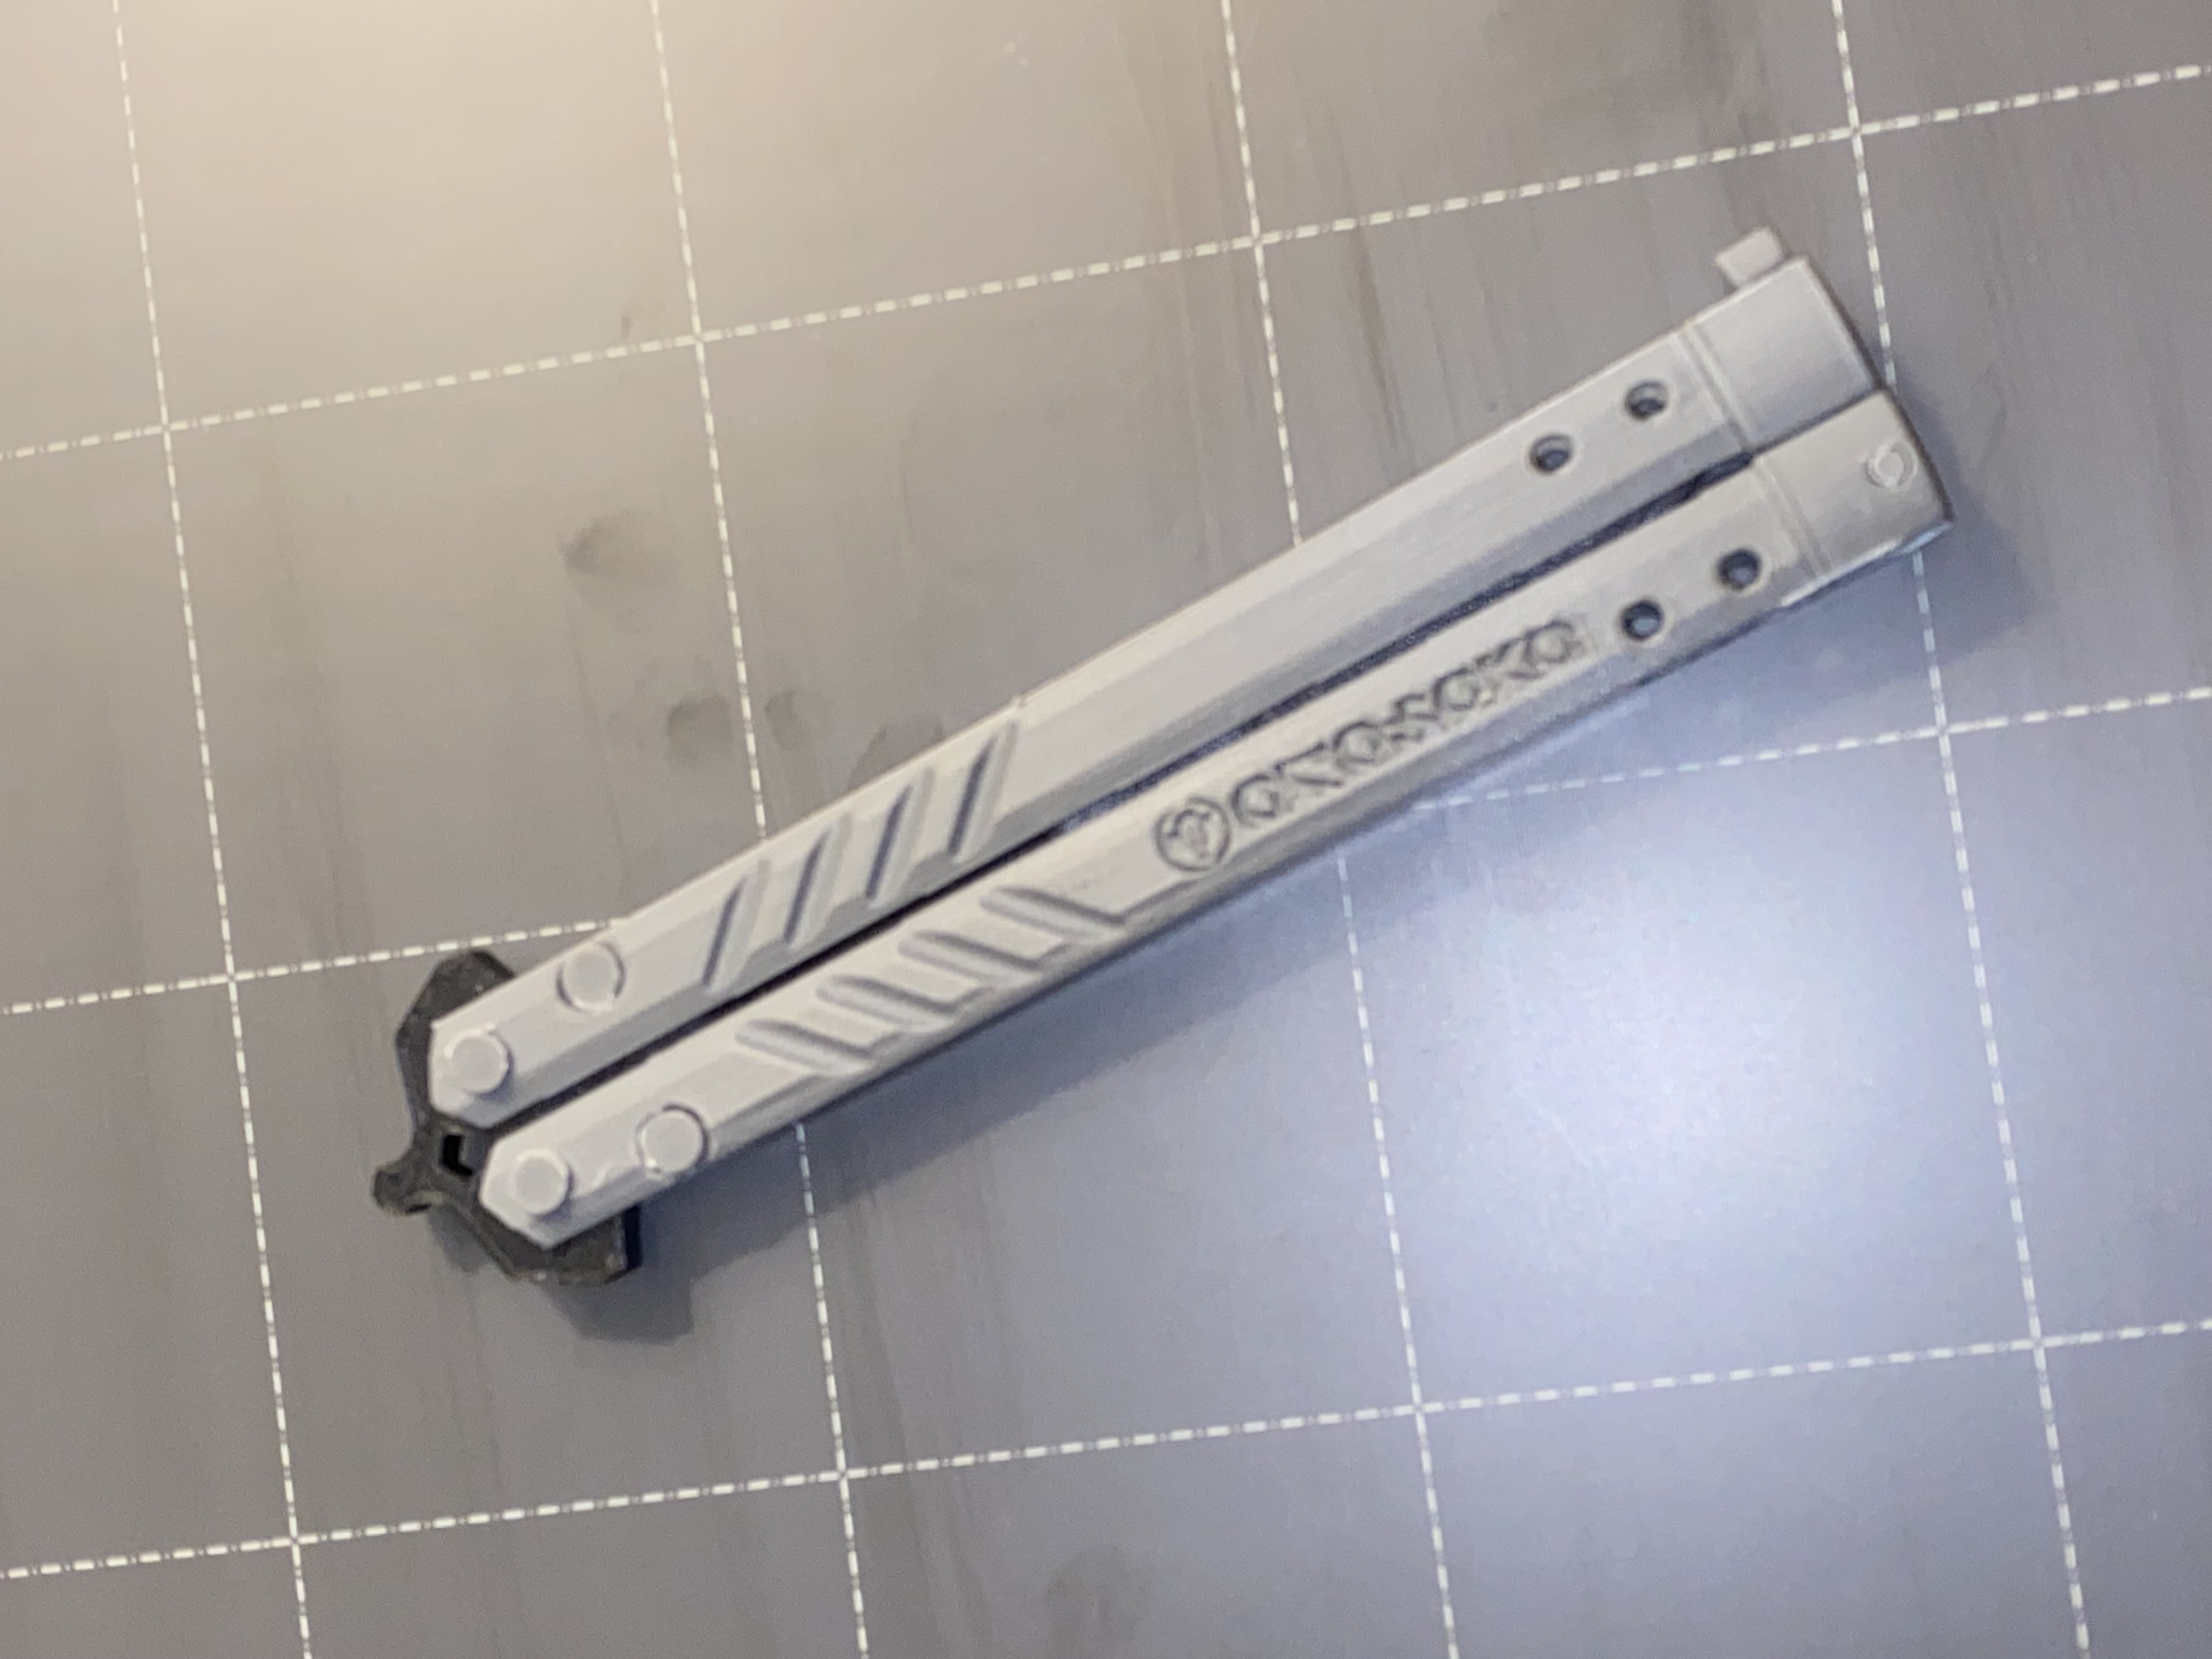 Fully Printable ~* Butterfly Knife Balisong Design - CyberPunk